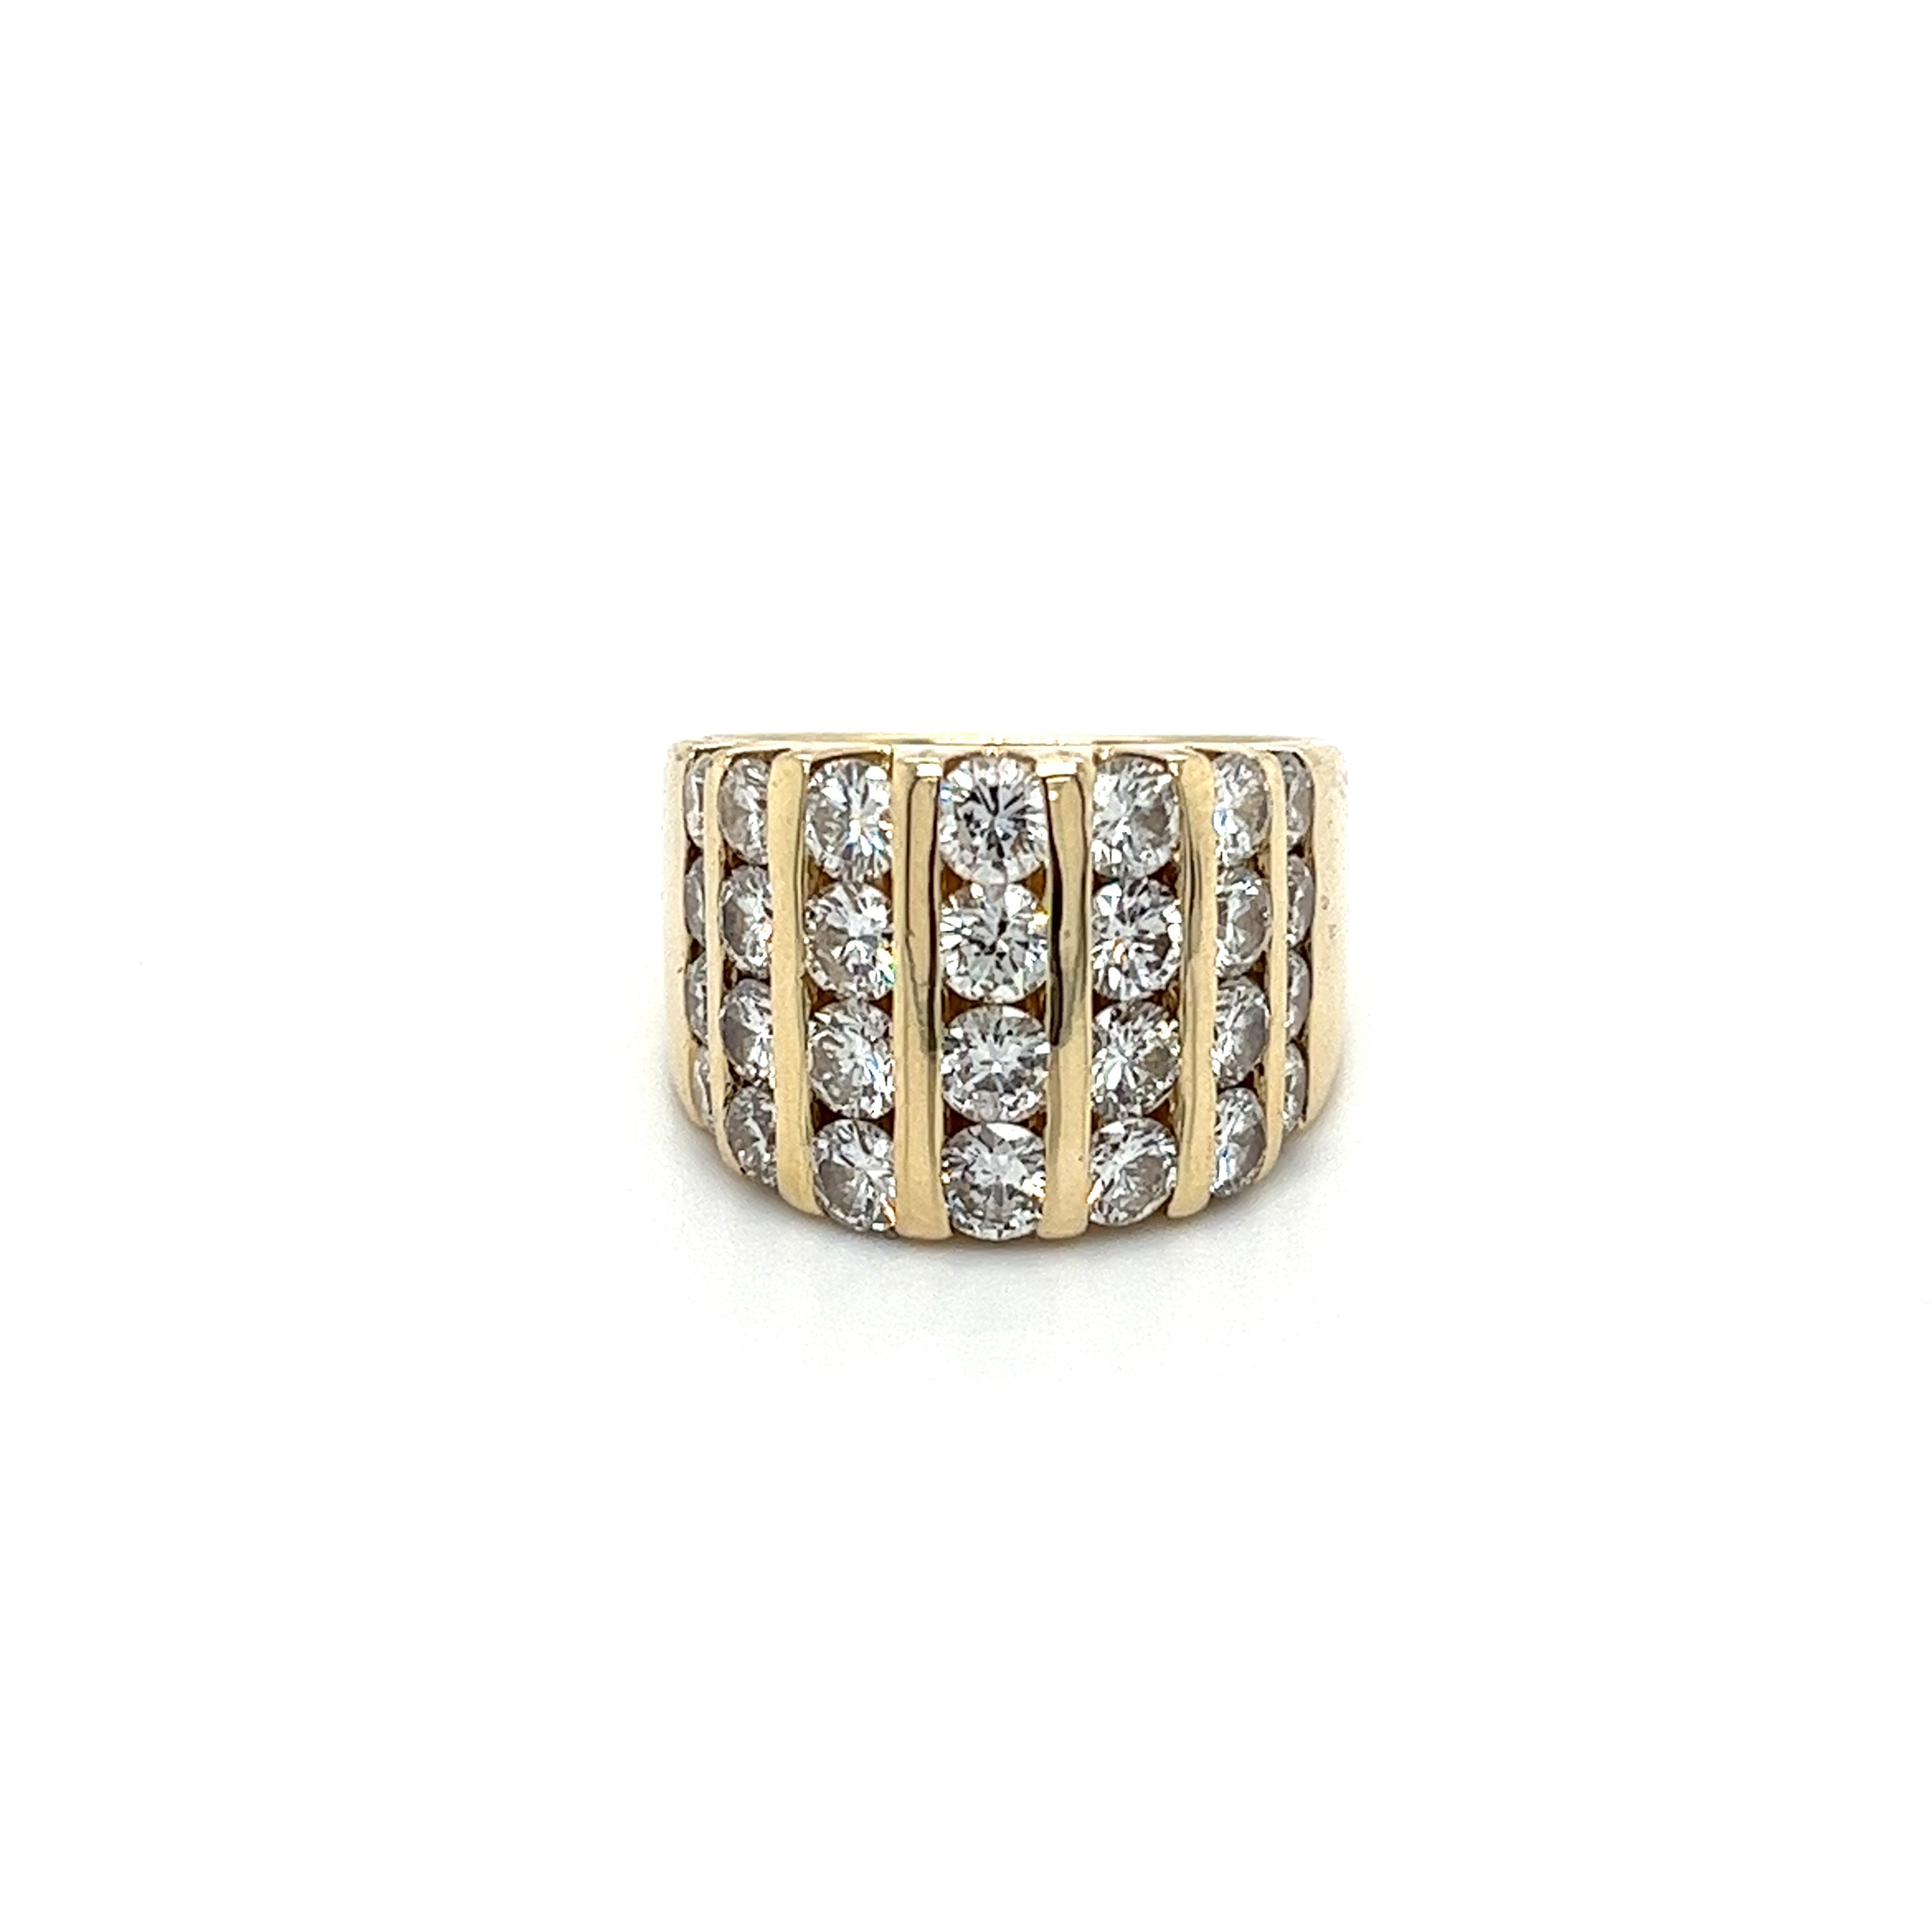 3_8-Carat-Channel-Set-Round-Cut-Diamond-Cluster-Ring-in-14K-Yellow-Gold-Rings.jpg